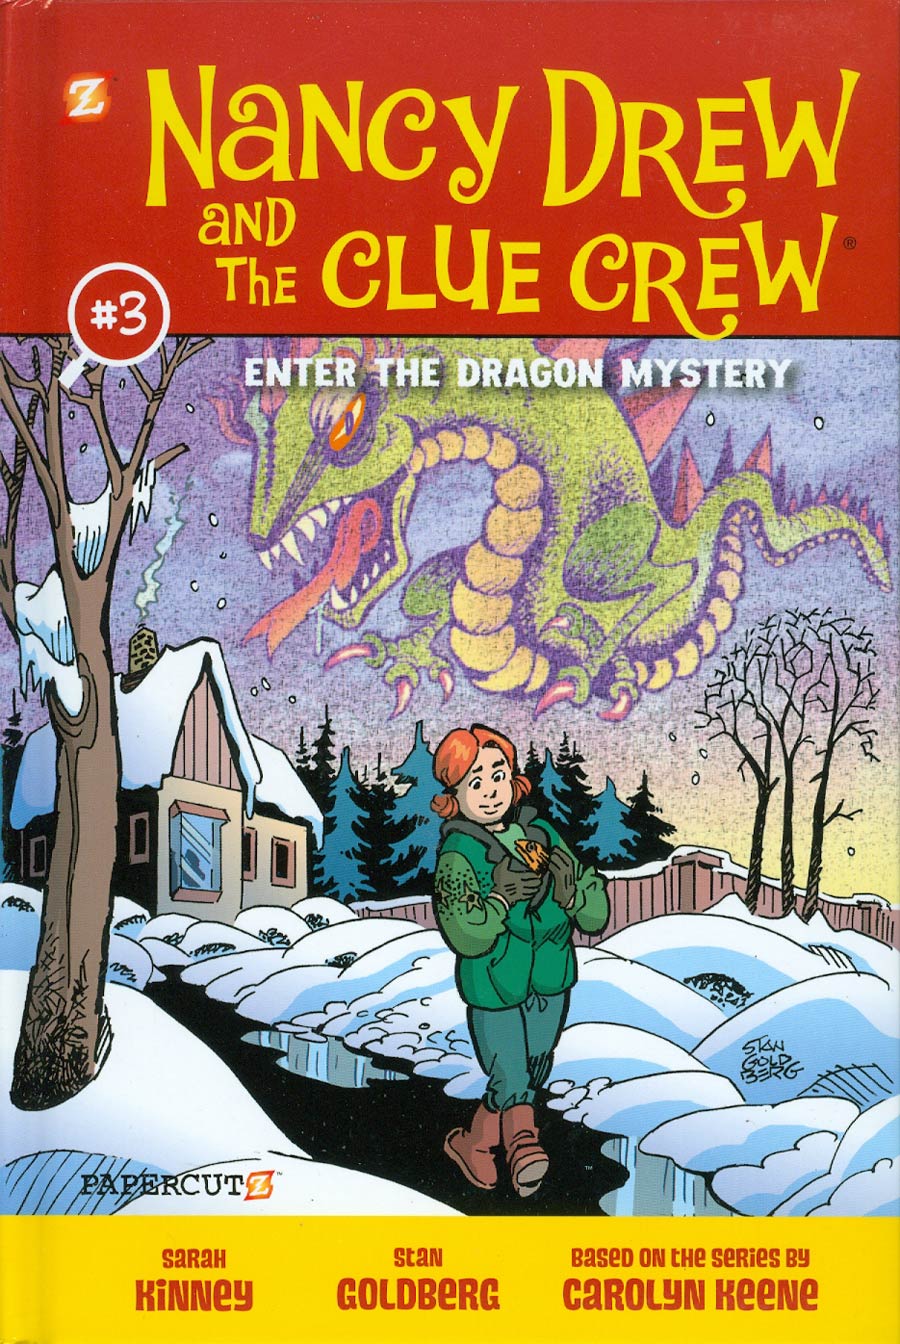 Nancy Drew And The Clue Crew Vol 3 Enter The Dragon Mystery HC